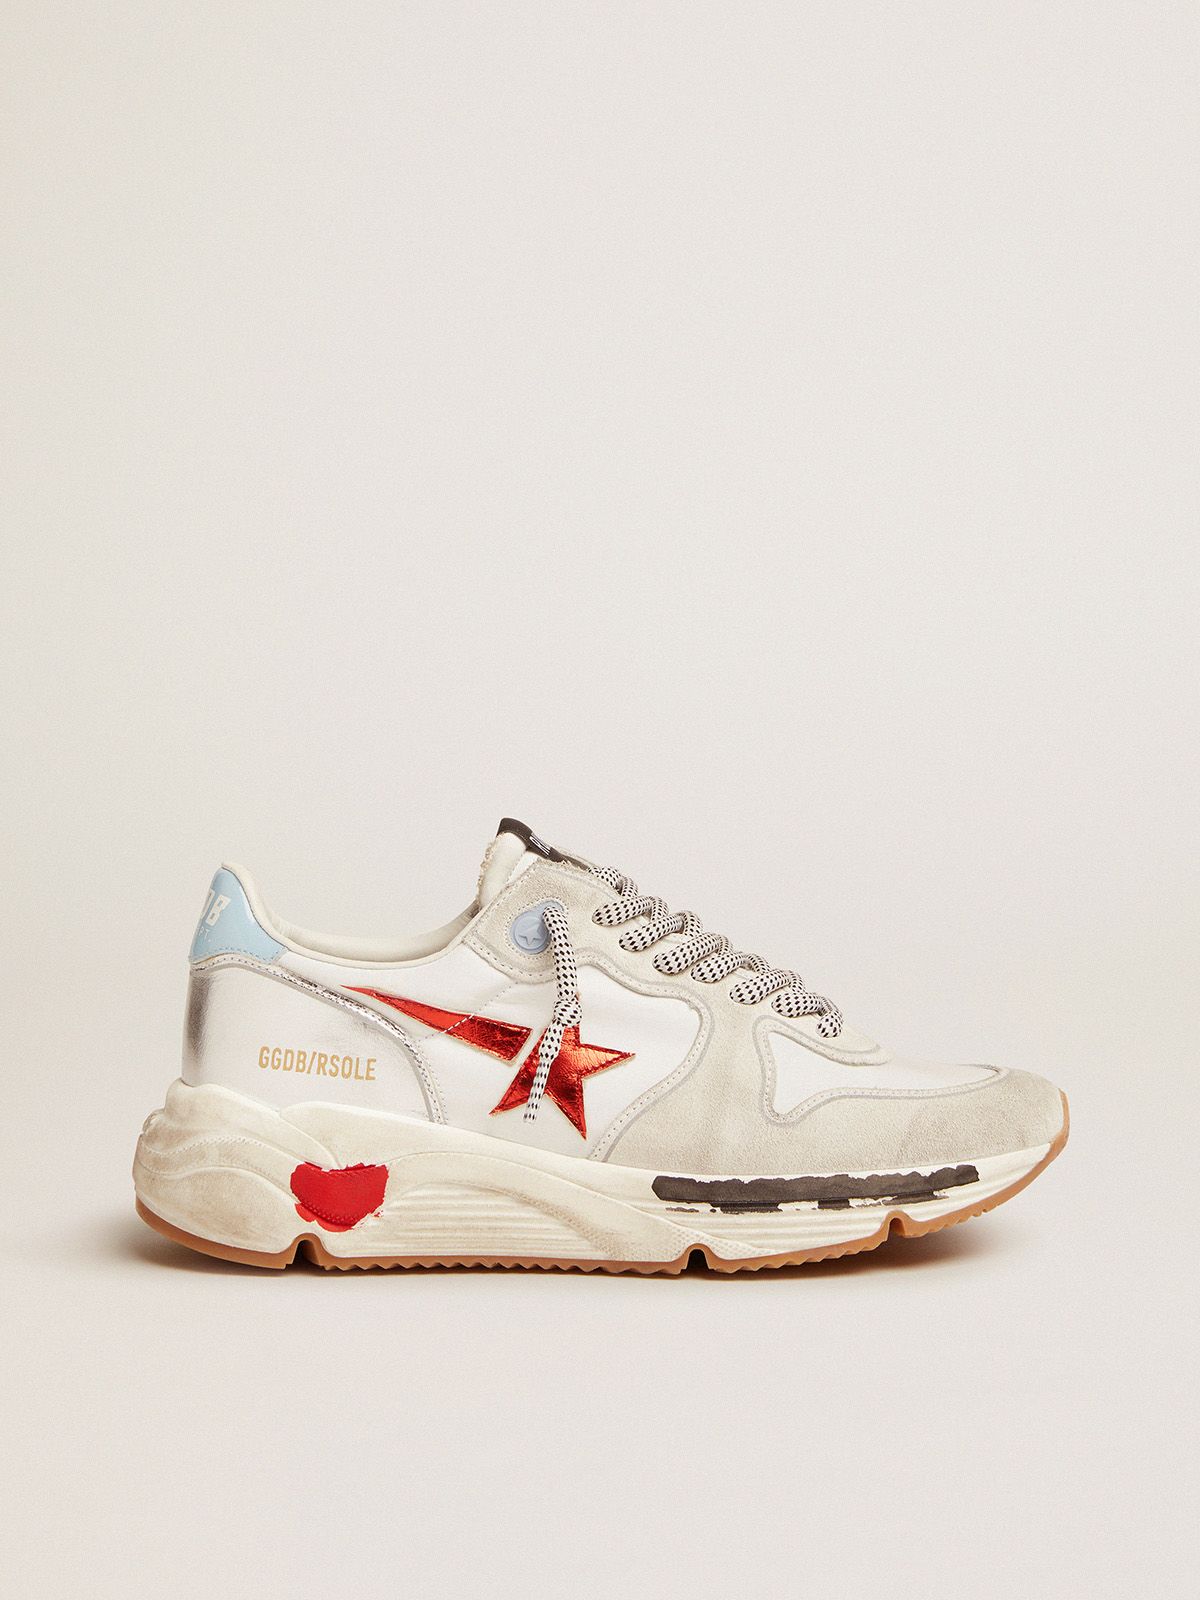 golden goose and nylon Sole with Running leather sneakers in suede red star laminated